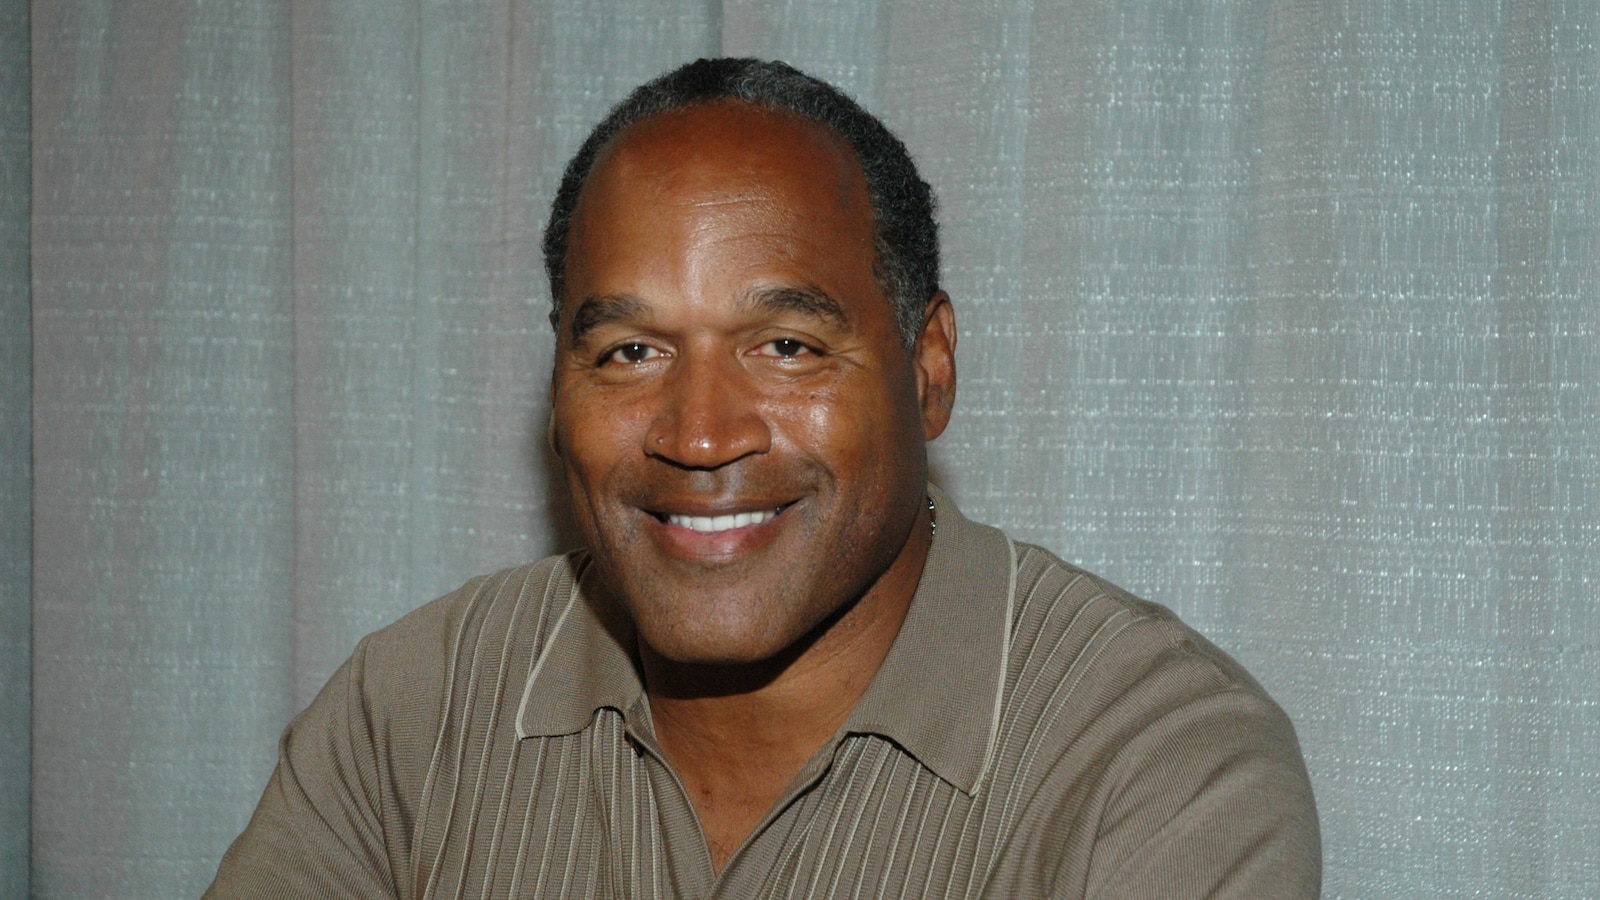 OJ Simpson dies after prostate cancer diagnosis: What to know about PSA screening